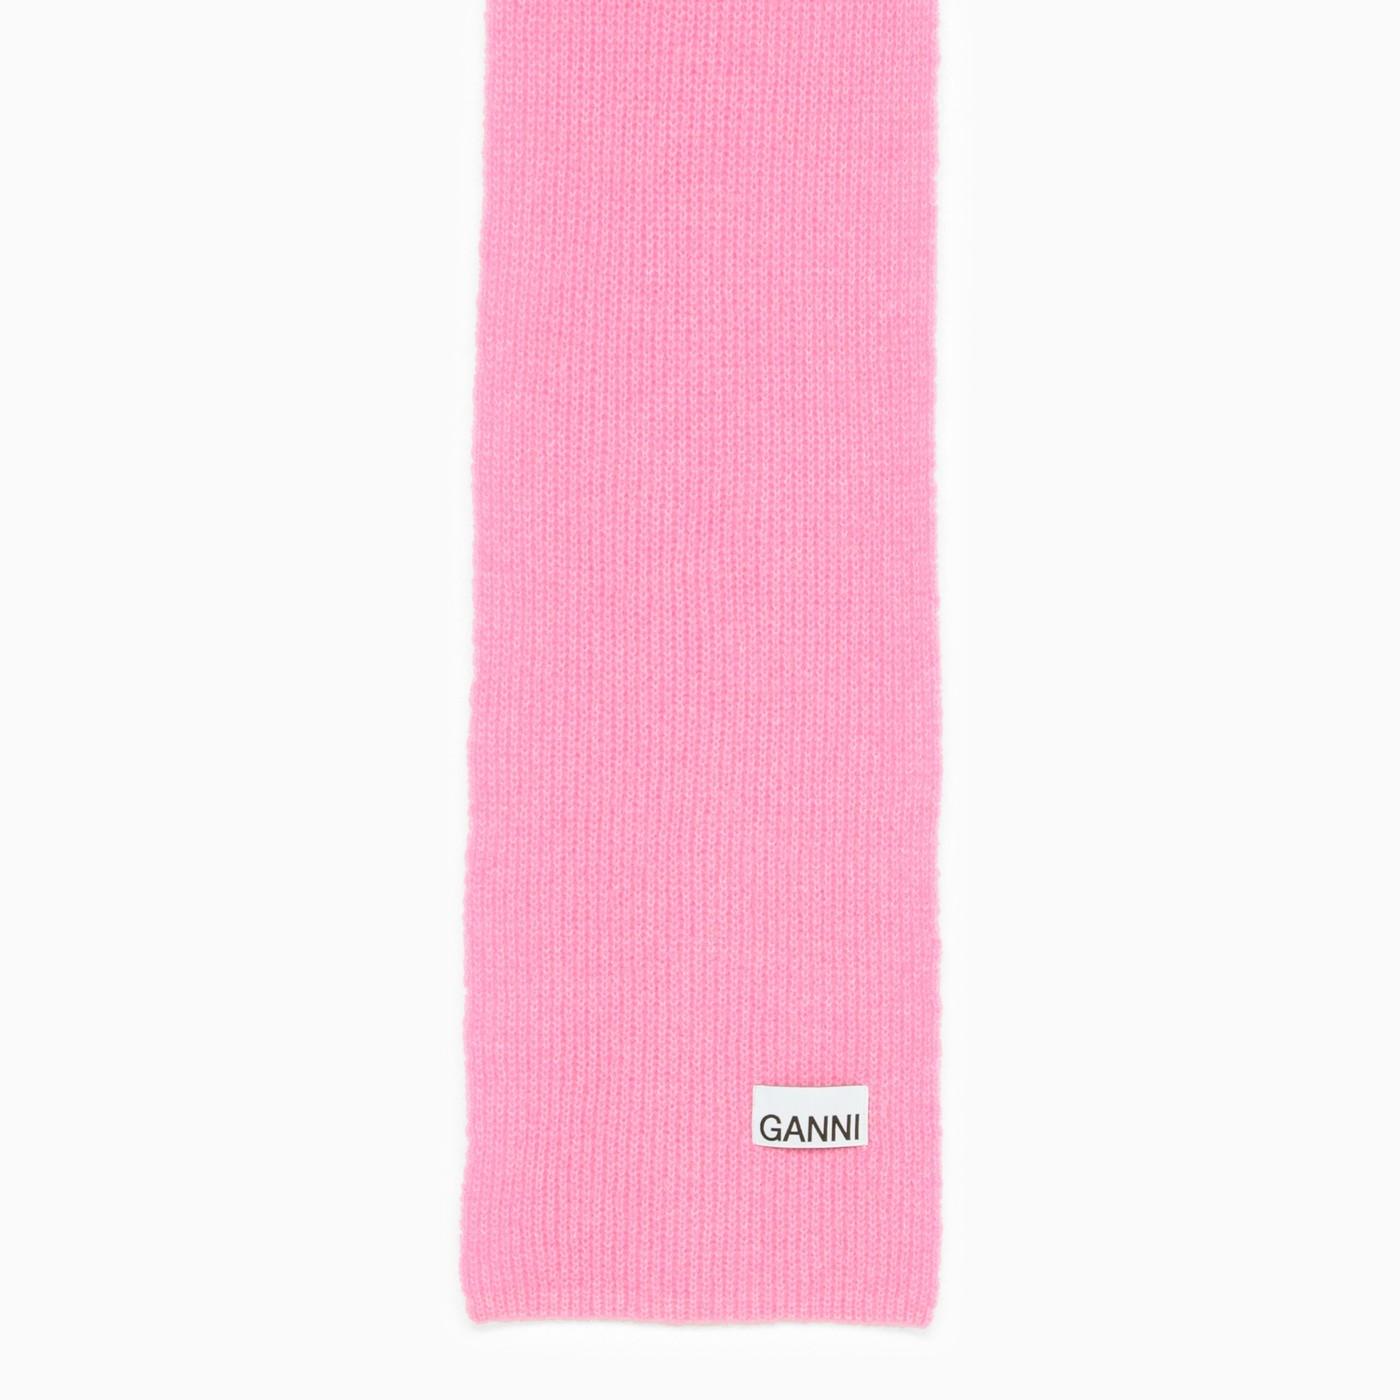 Ganni Knitted Scarf in Pink | Lyst